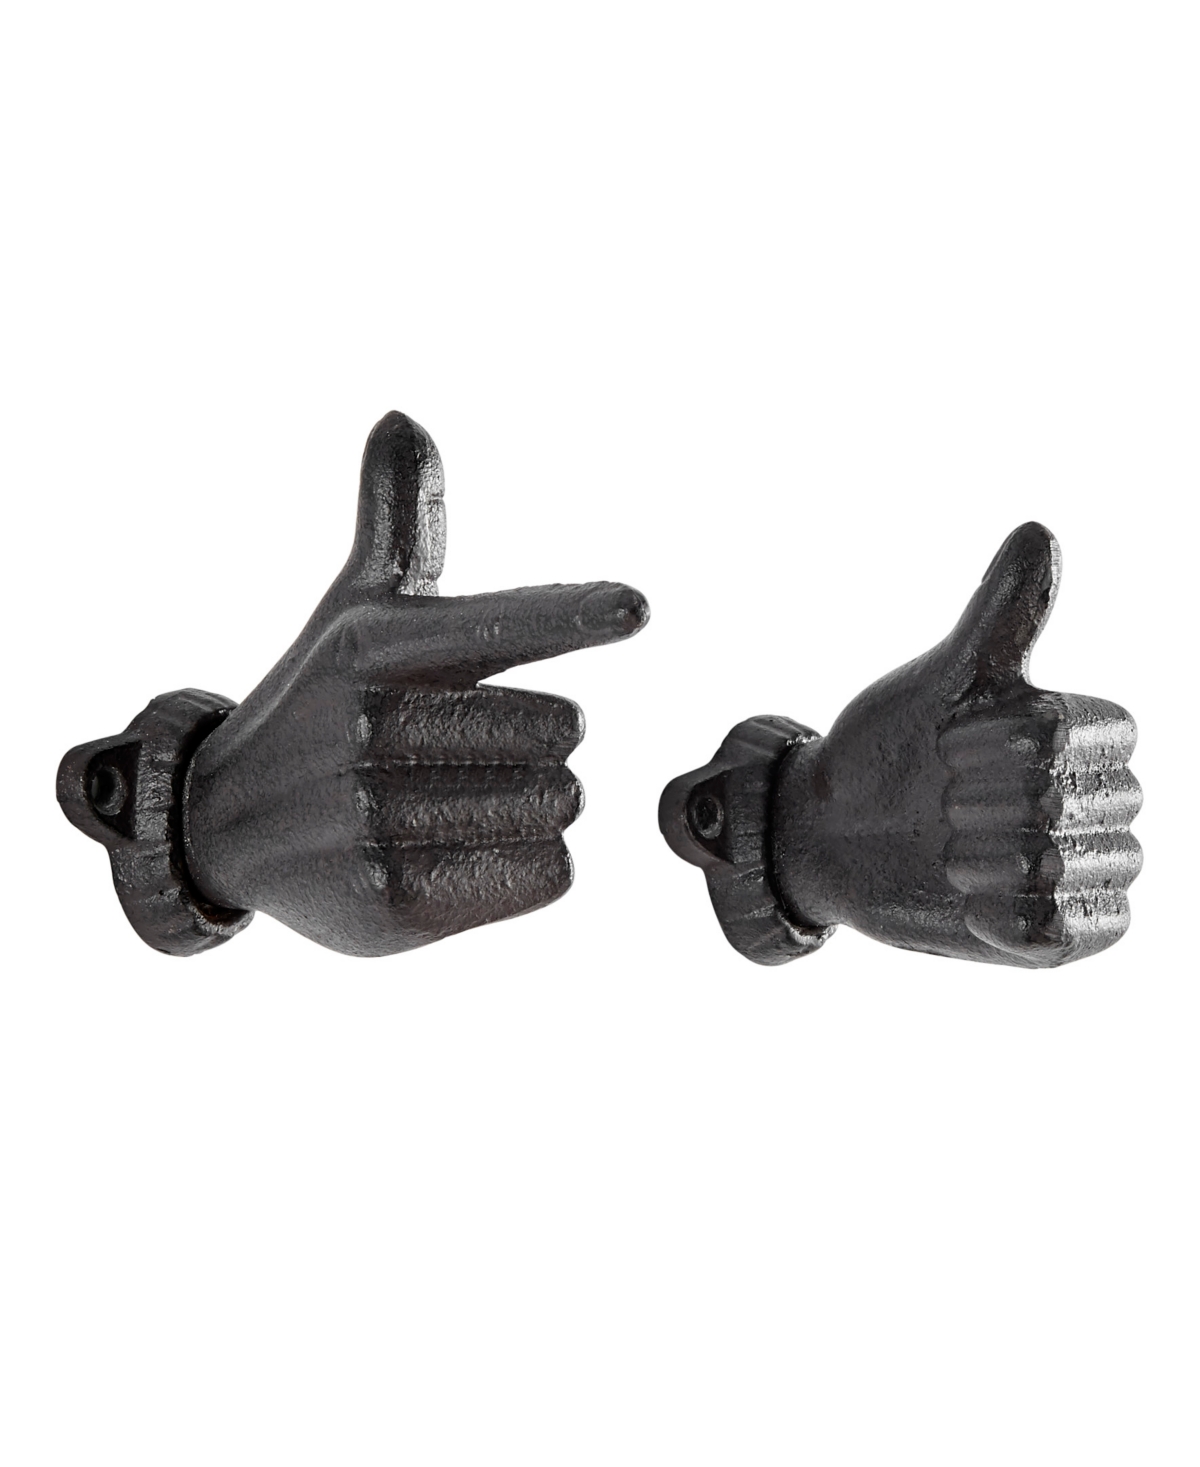 Danya B "thumbs Up Pointing Finger" Cast Iron 2-piece Wall Mount Hook Set In Dark Gray